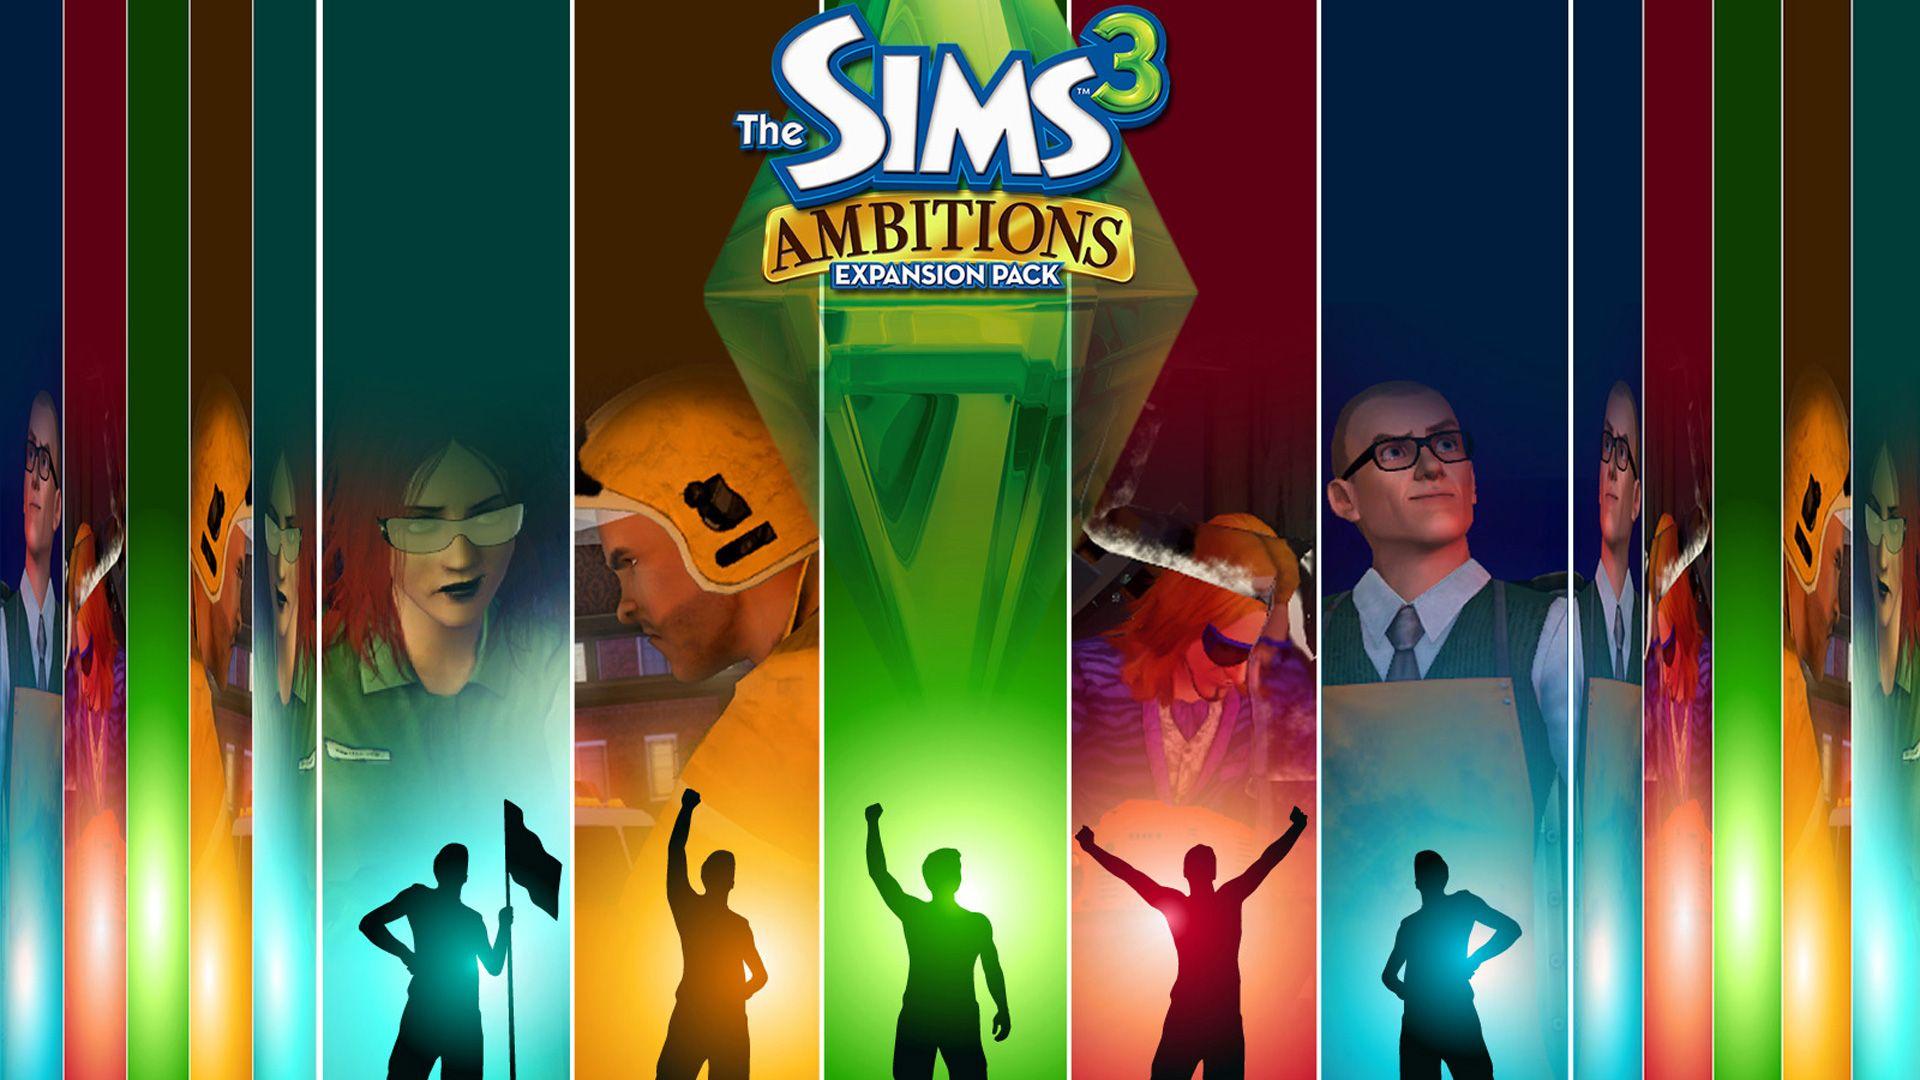 Free The Sims 3 Wallpaper in 1920x1080